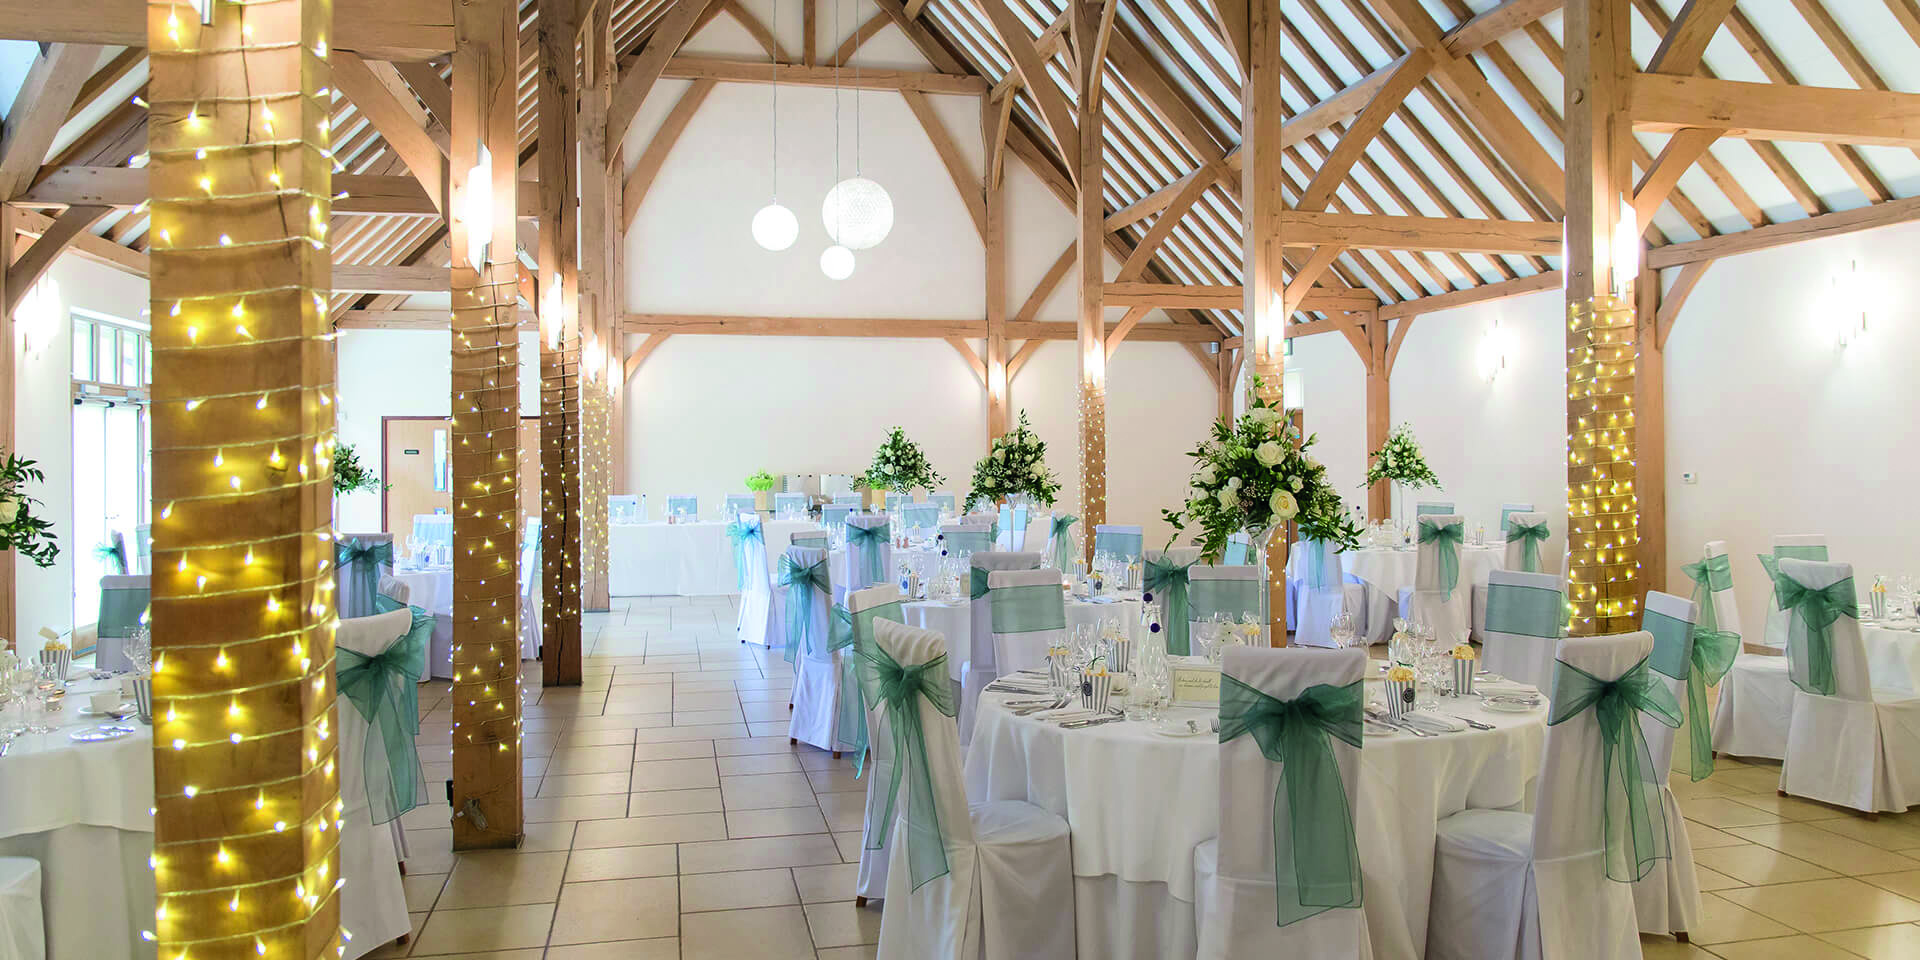 The Dining Barn looked beautifully with spring time blue bows and twinkling lights